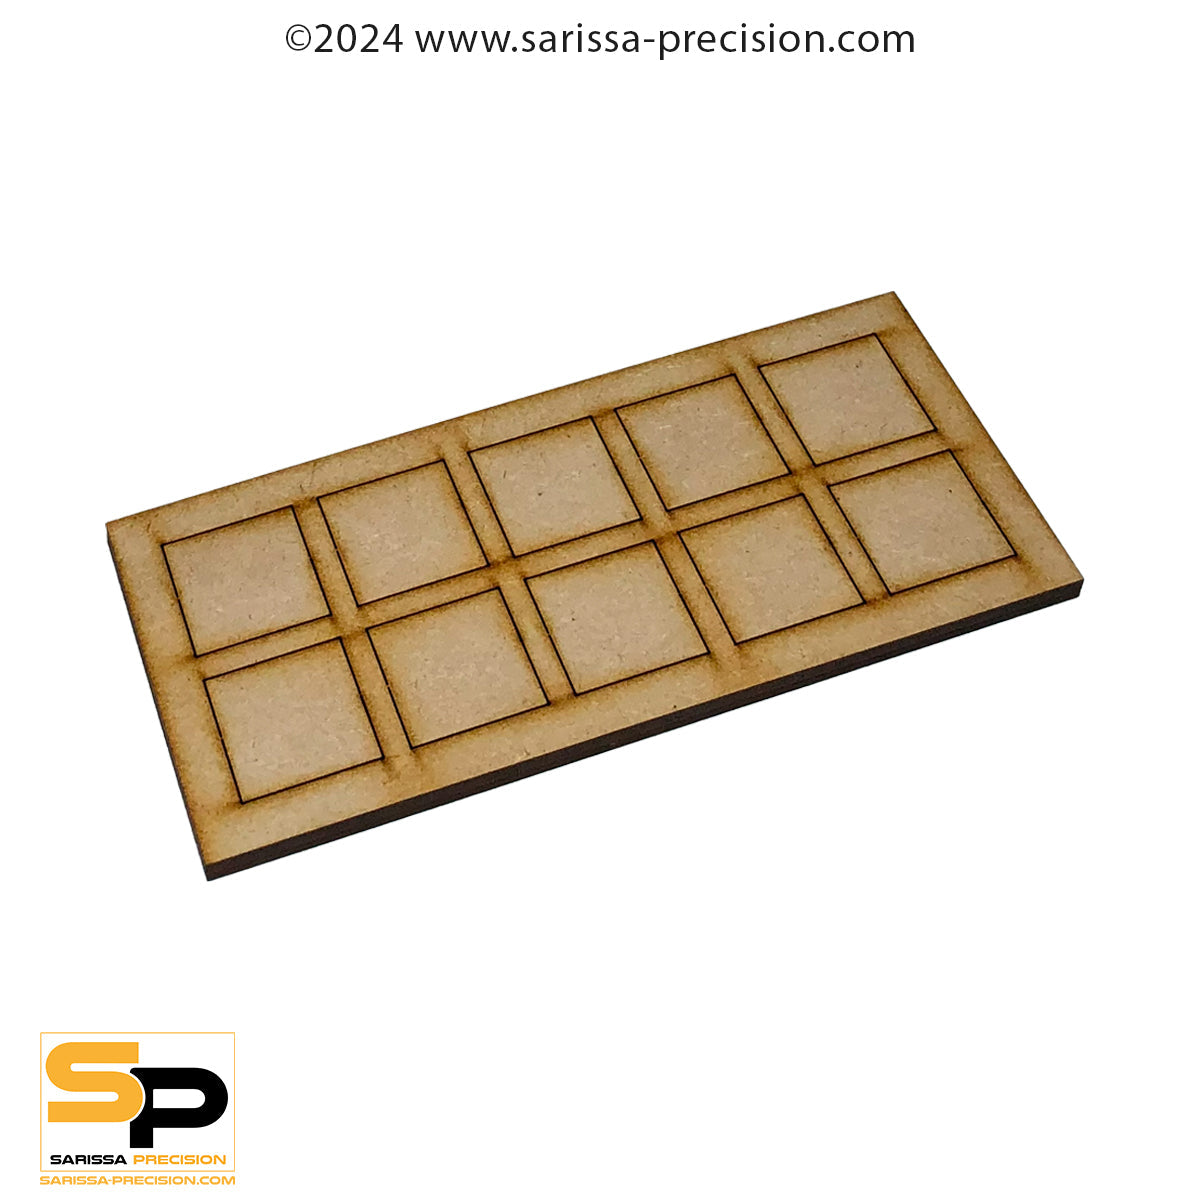 12 x 2 30x30mm Conversion Tray for 25x25mm bases